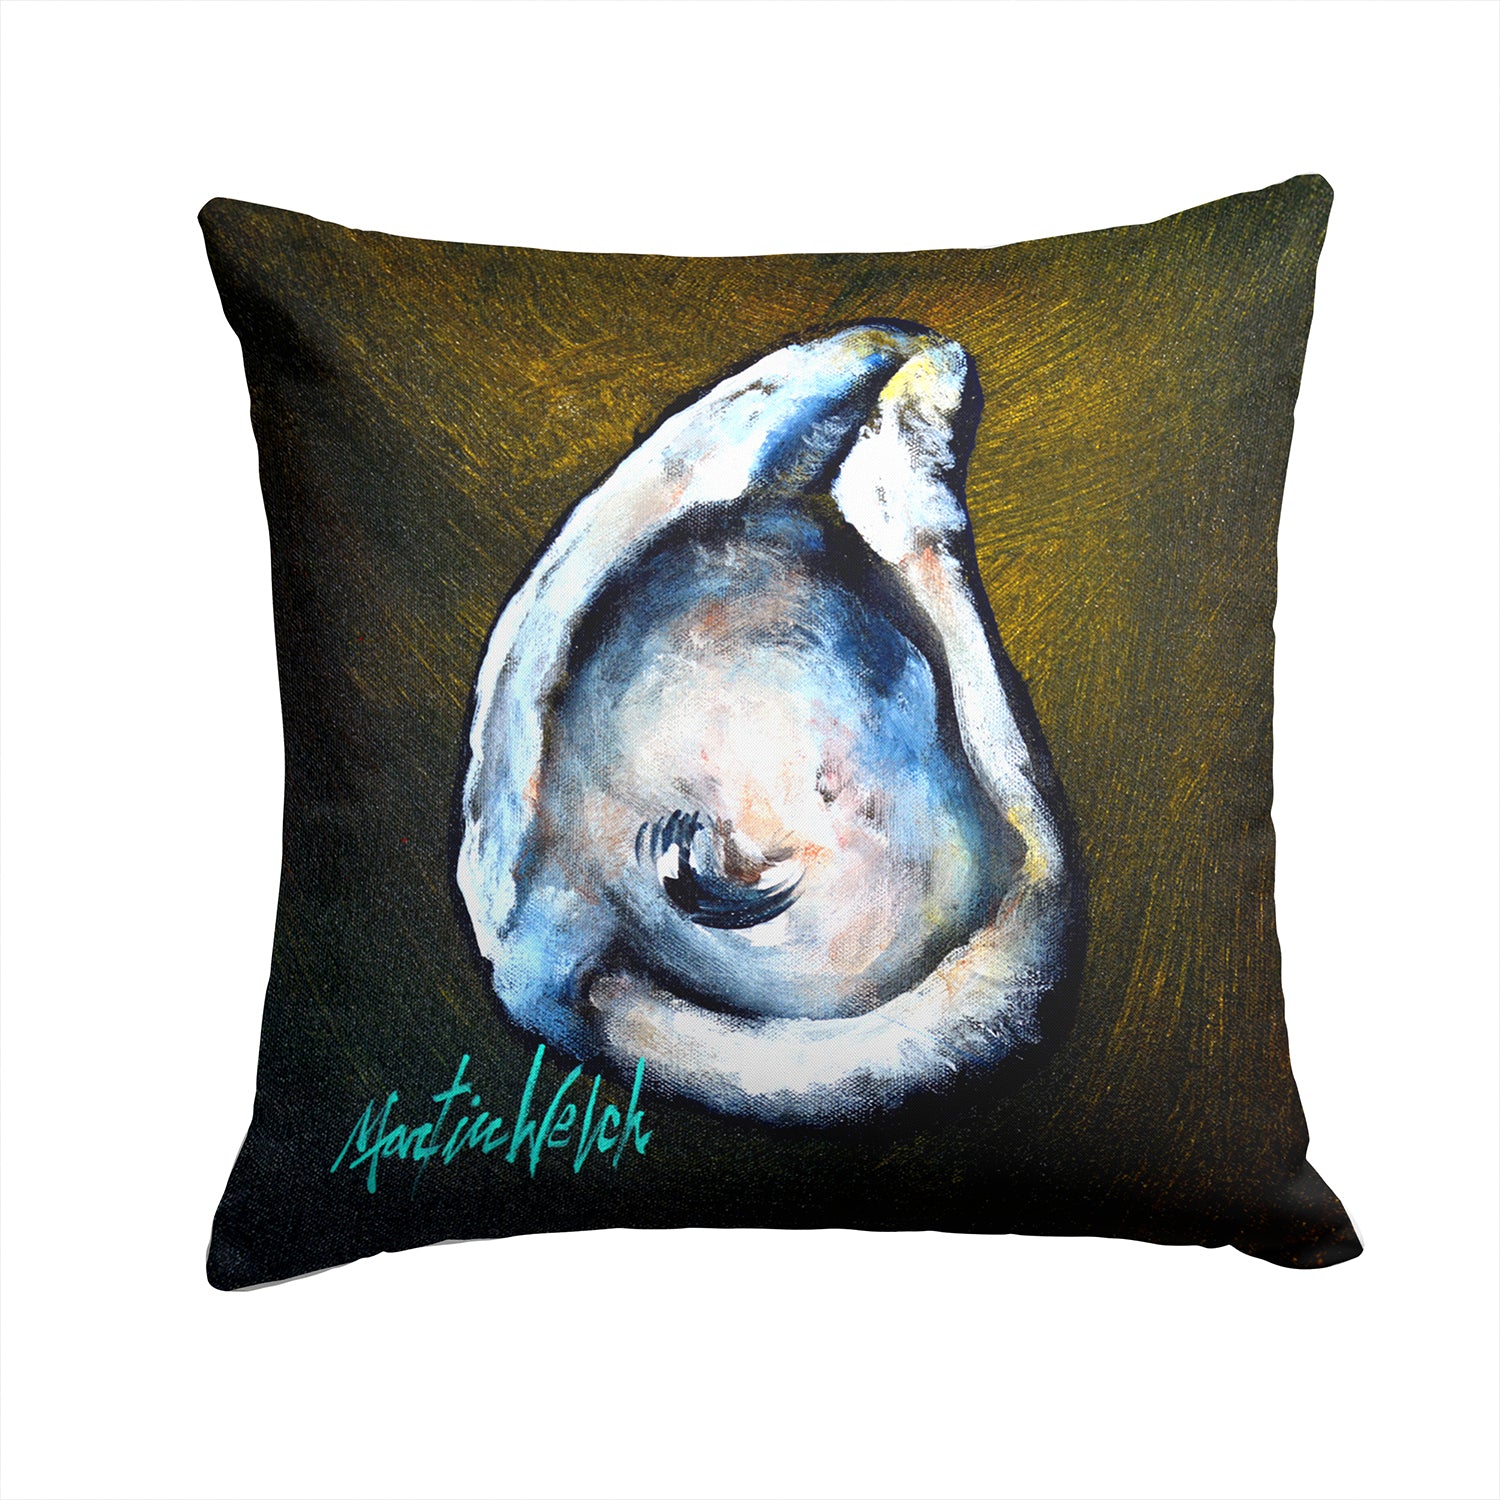 Buy this Brown Eye Oyster Fabric Decorative Pillow